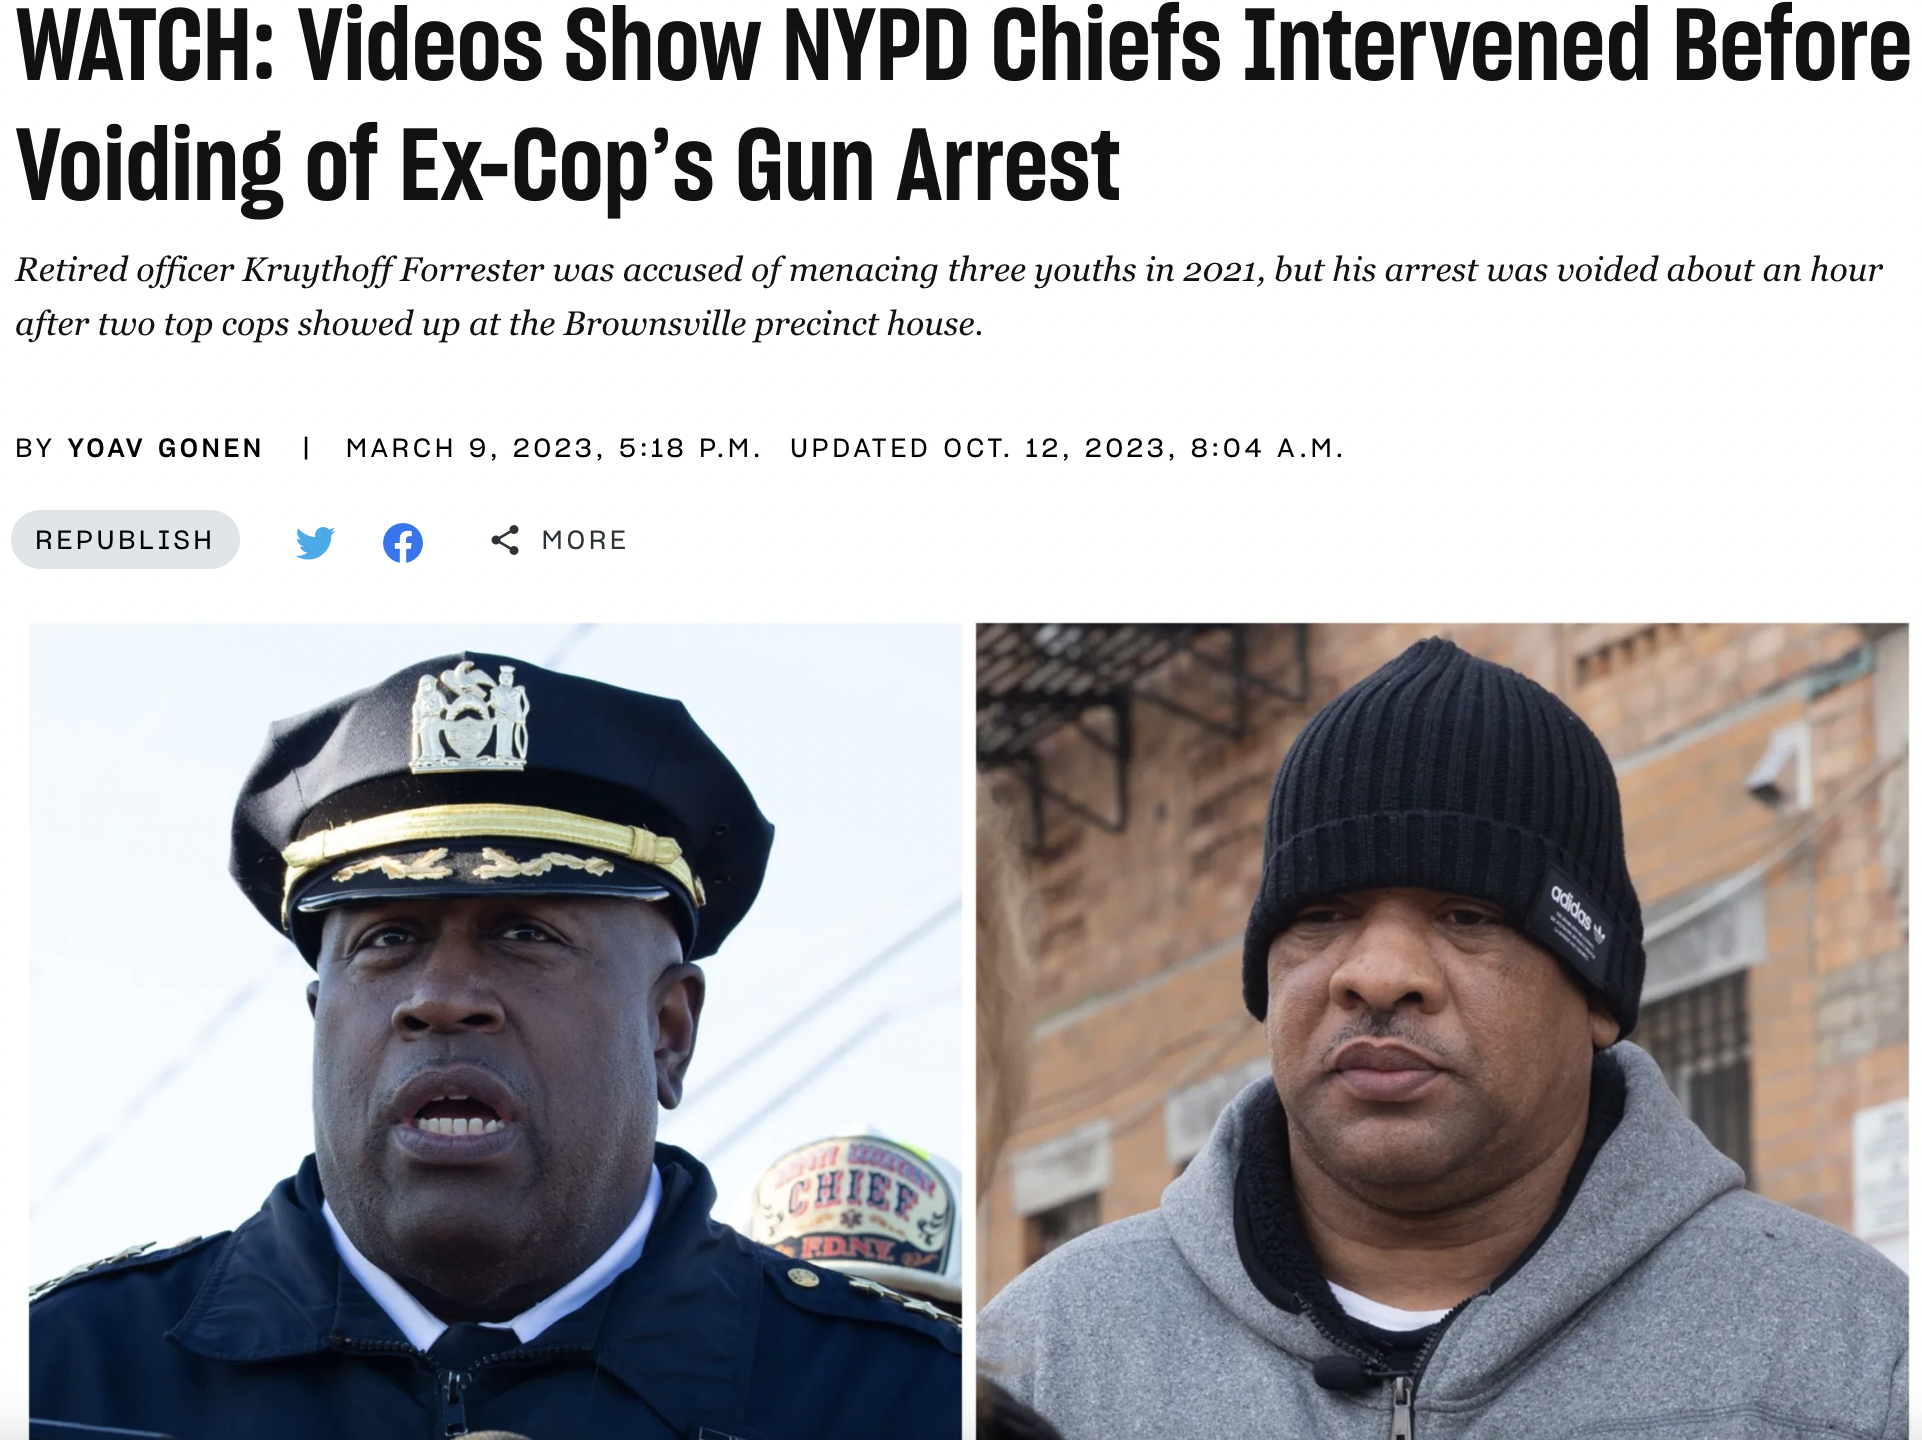 cap - Watch Videos Show Nypd Chiefs Intervened Before Voiding of ExCop's Gun Arrest Retired officer Kruythoff Forrester was accused of menacing three youths in 2021, but his arrest was voided about an hour after two top cops showed up at the Brownsville p